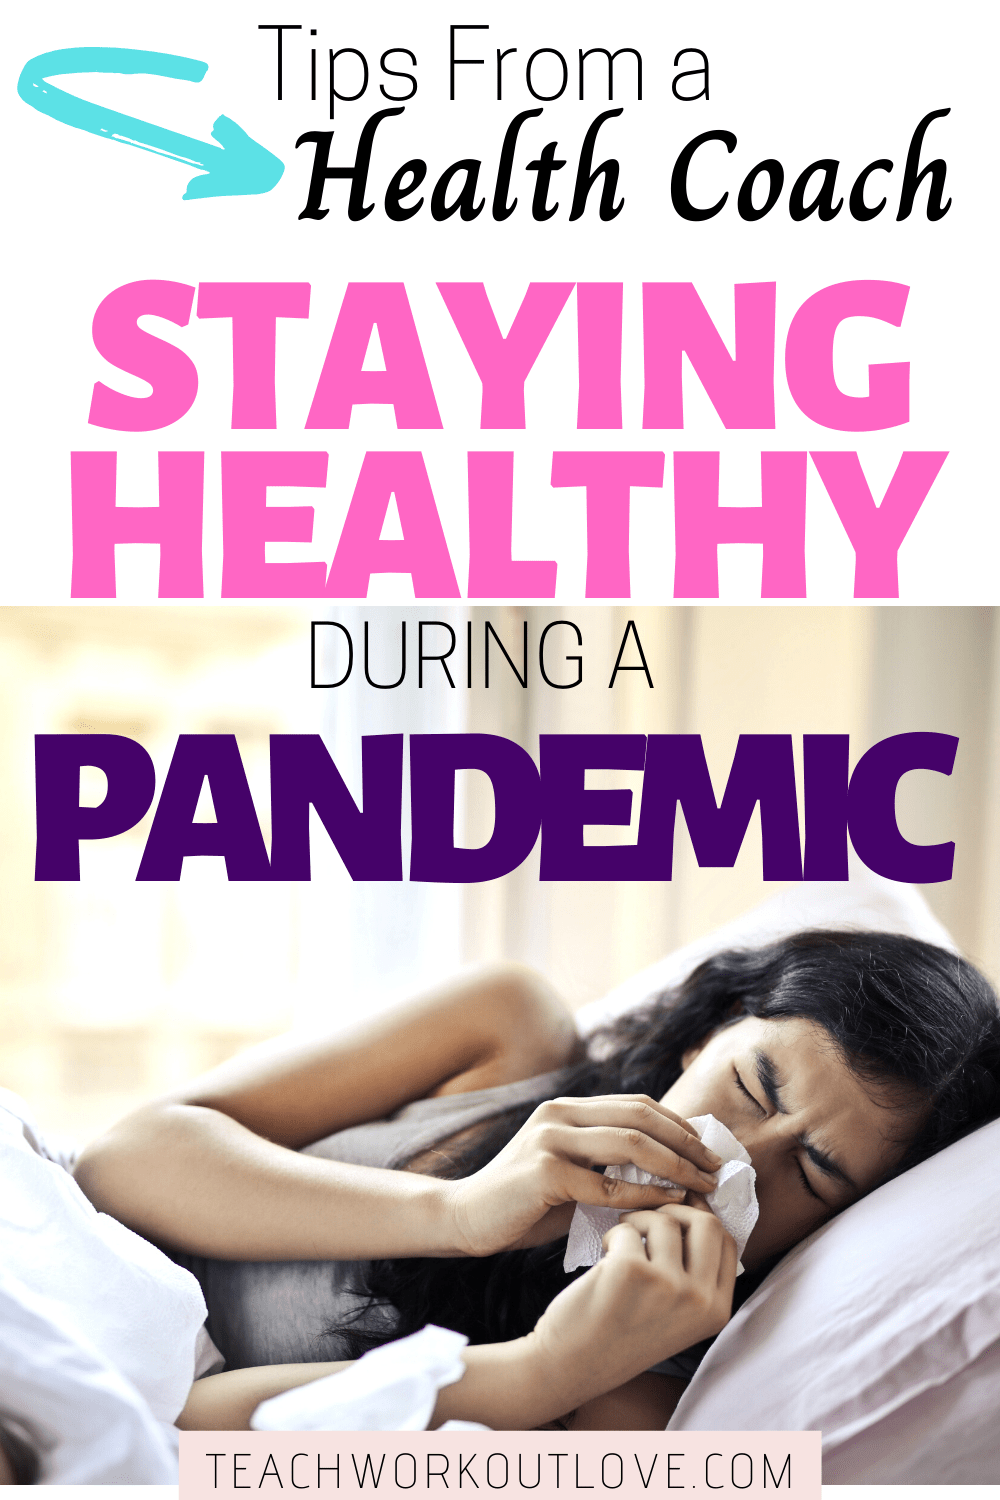 Check out these tips from Health Coach, Donna LaBar to protect your health during pandemics. Also, consult with your health care provider.